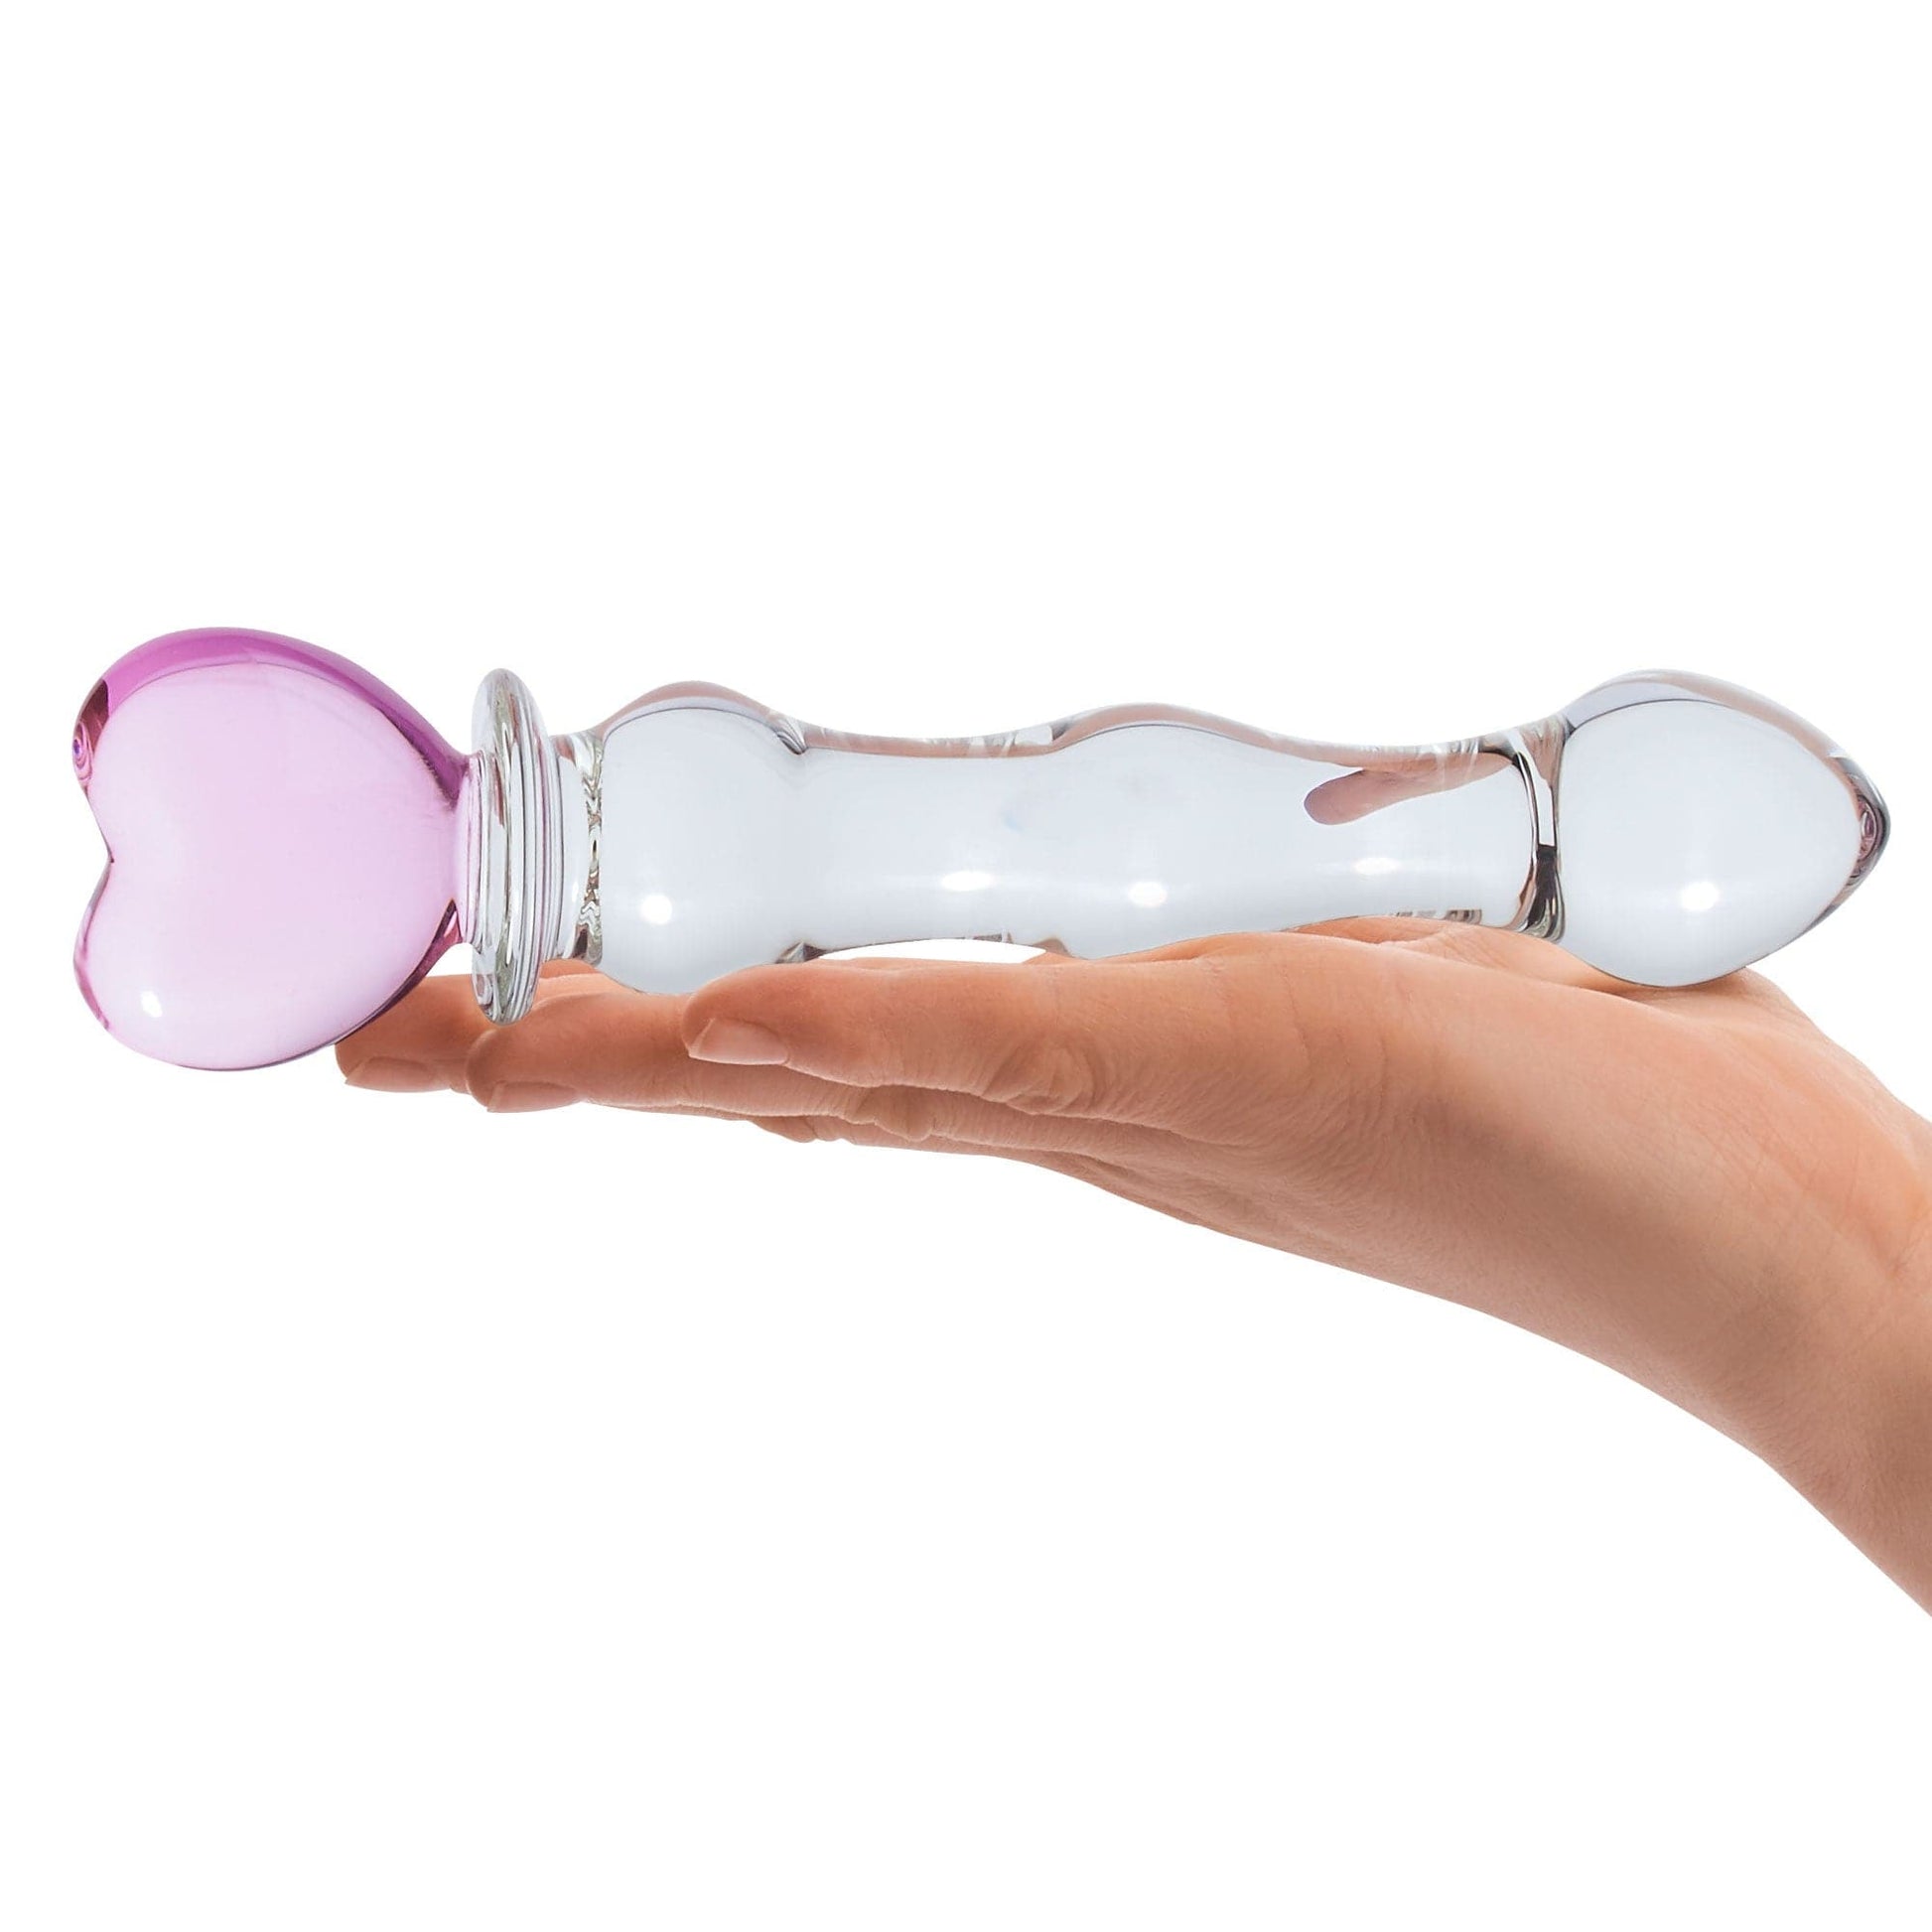 8 inch sweetheart glass dildo pink clear